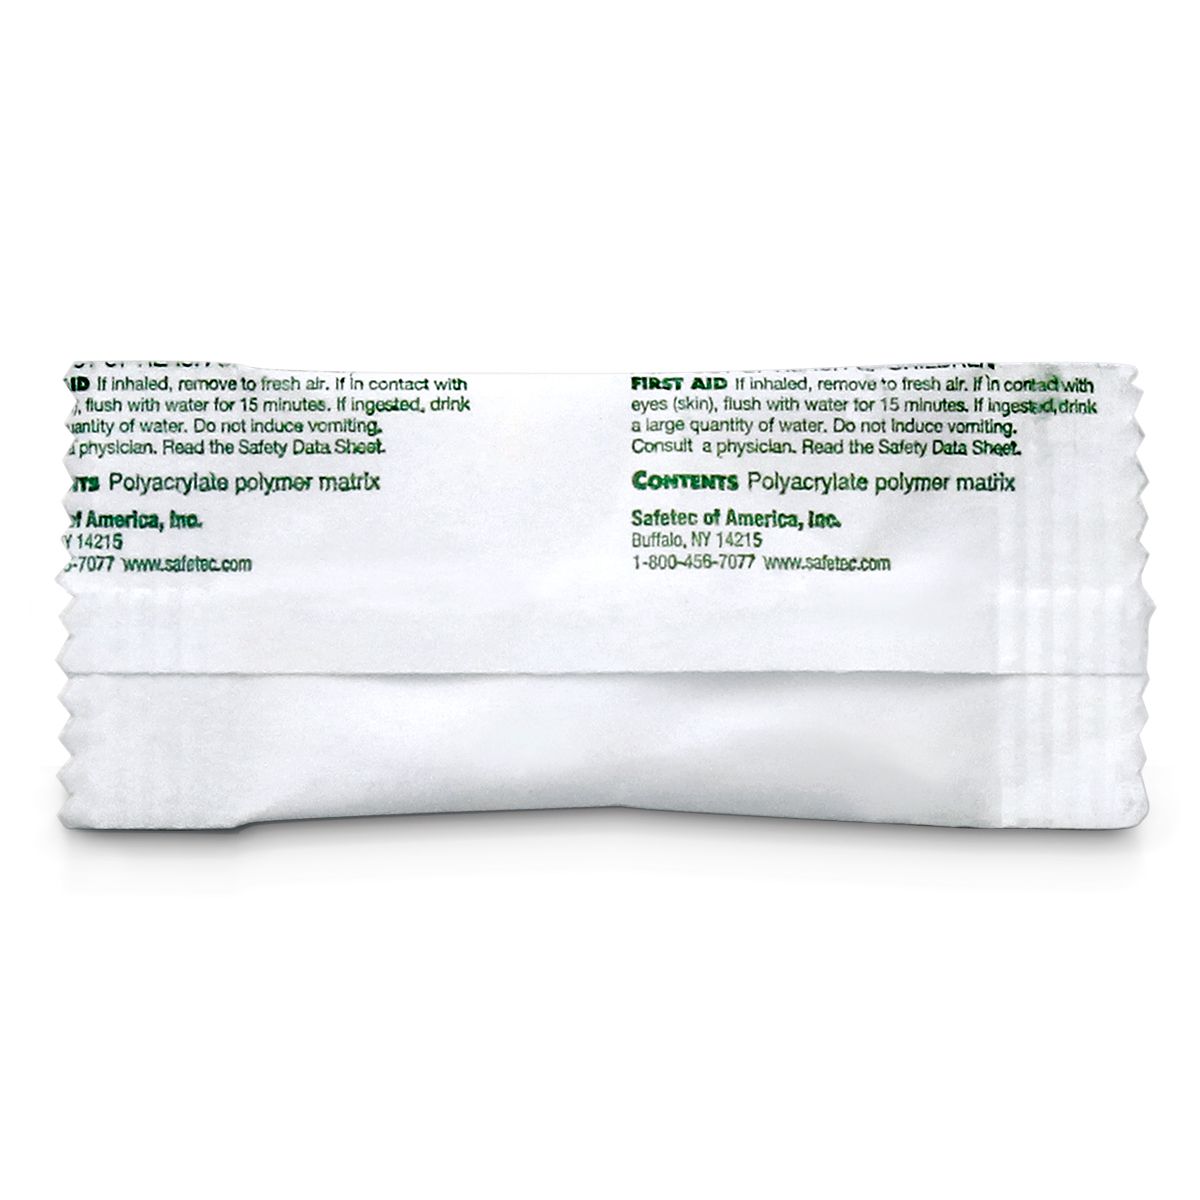 Green-Z® Spill Control Solidifier Zafety Pacs - Infection and Spill Control